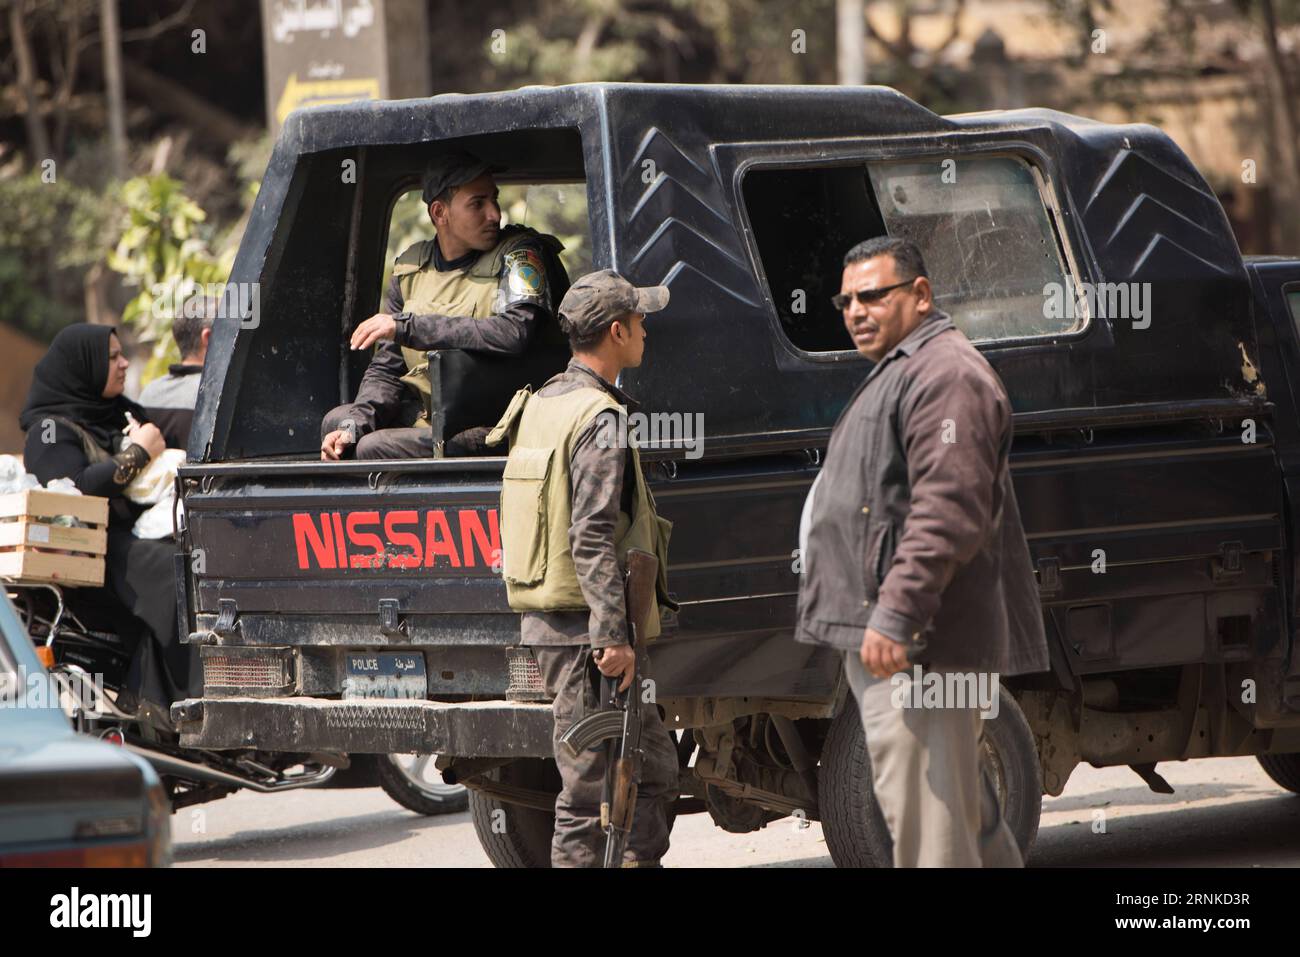 (170324) -- CAIRO, March 24, 2017 -- Policemen stand guard at the explosion site at Maadi district in Cairo, Egypt, March 24, 2017. One person was killed and four others wounded on Friday when an explosive device went off in a garden in Maadi district southeastern the capital Cairo, the interior ministry said in a statement. ) (zw) EGYPT-CAIRO-BLAST MengxTao PUBLICATIONxNOTxINxCHN   Cairo March 24 2017 Policemen stand Guard AT The Explosion Site AT Maadi District in Cairo Egypt March 24 2017 One Person what KILLED and Four Others Wounded ON Friday When to Explosive Device Went off in a Garden Stock Photo